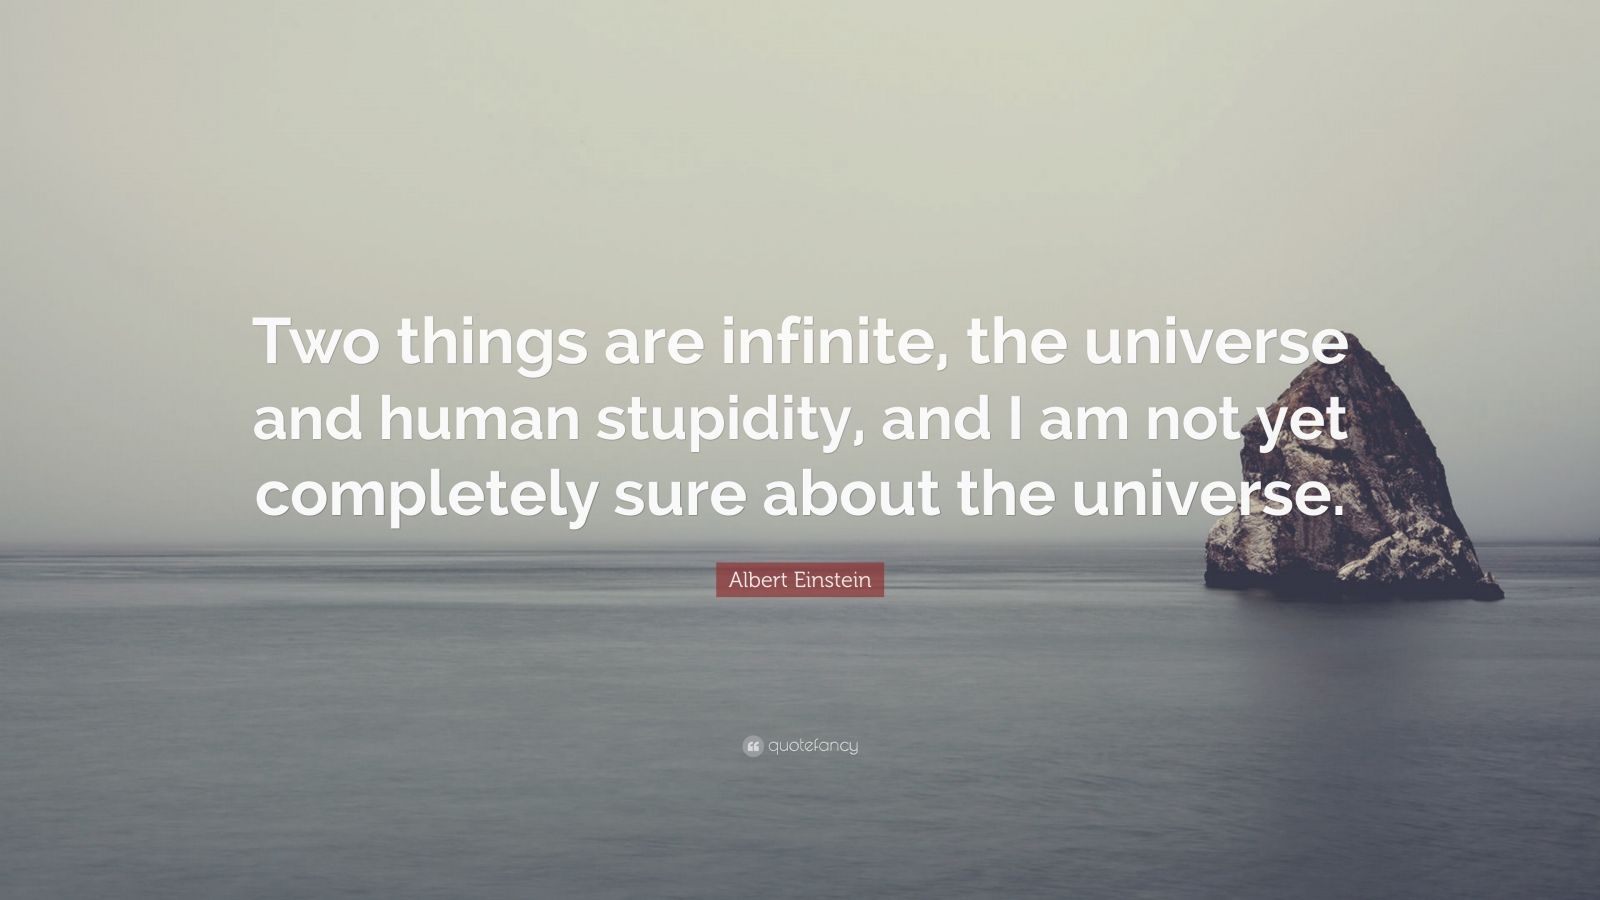 Albert Einstein Quote: "Two things are infinite, the ...